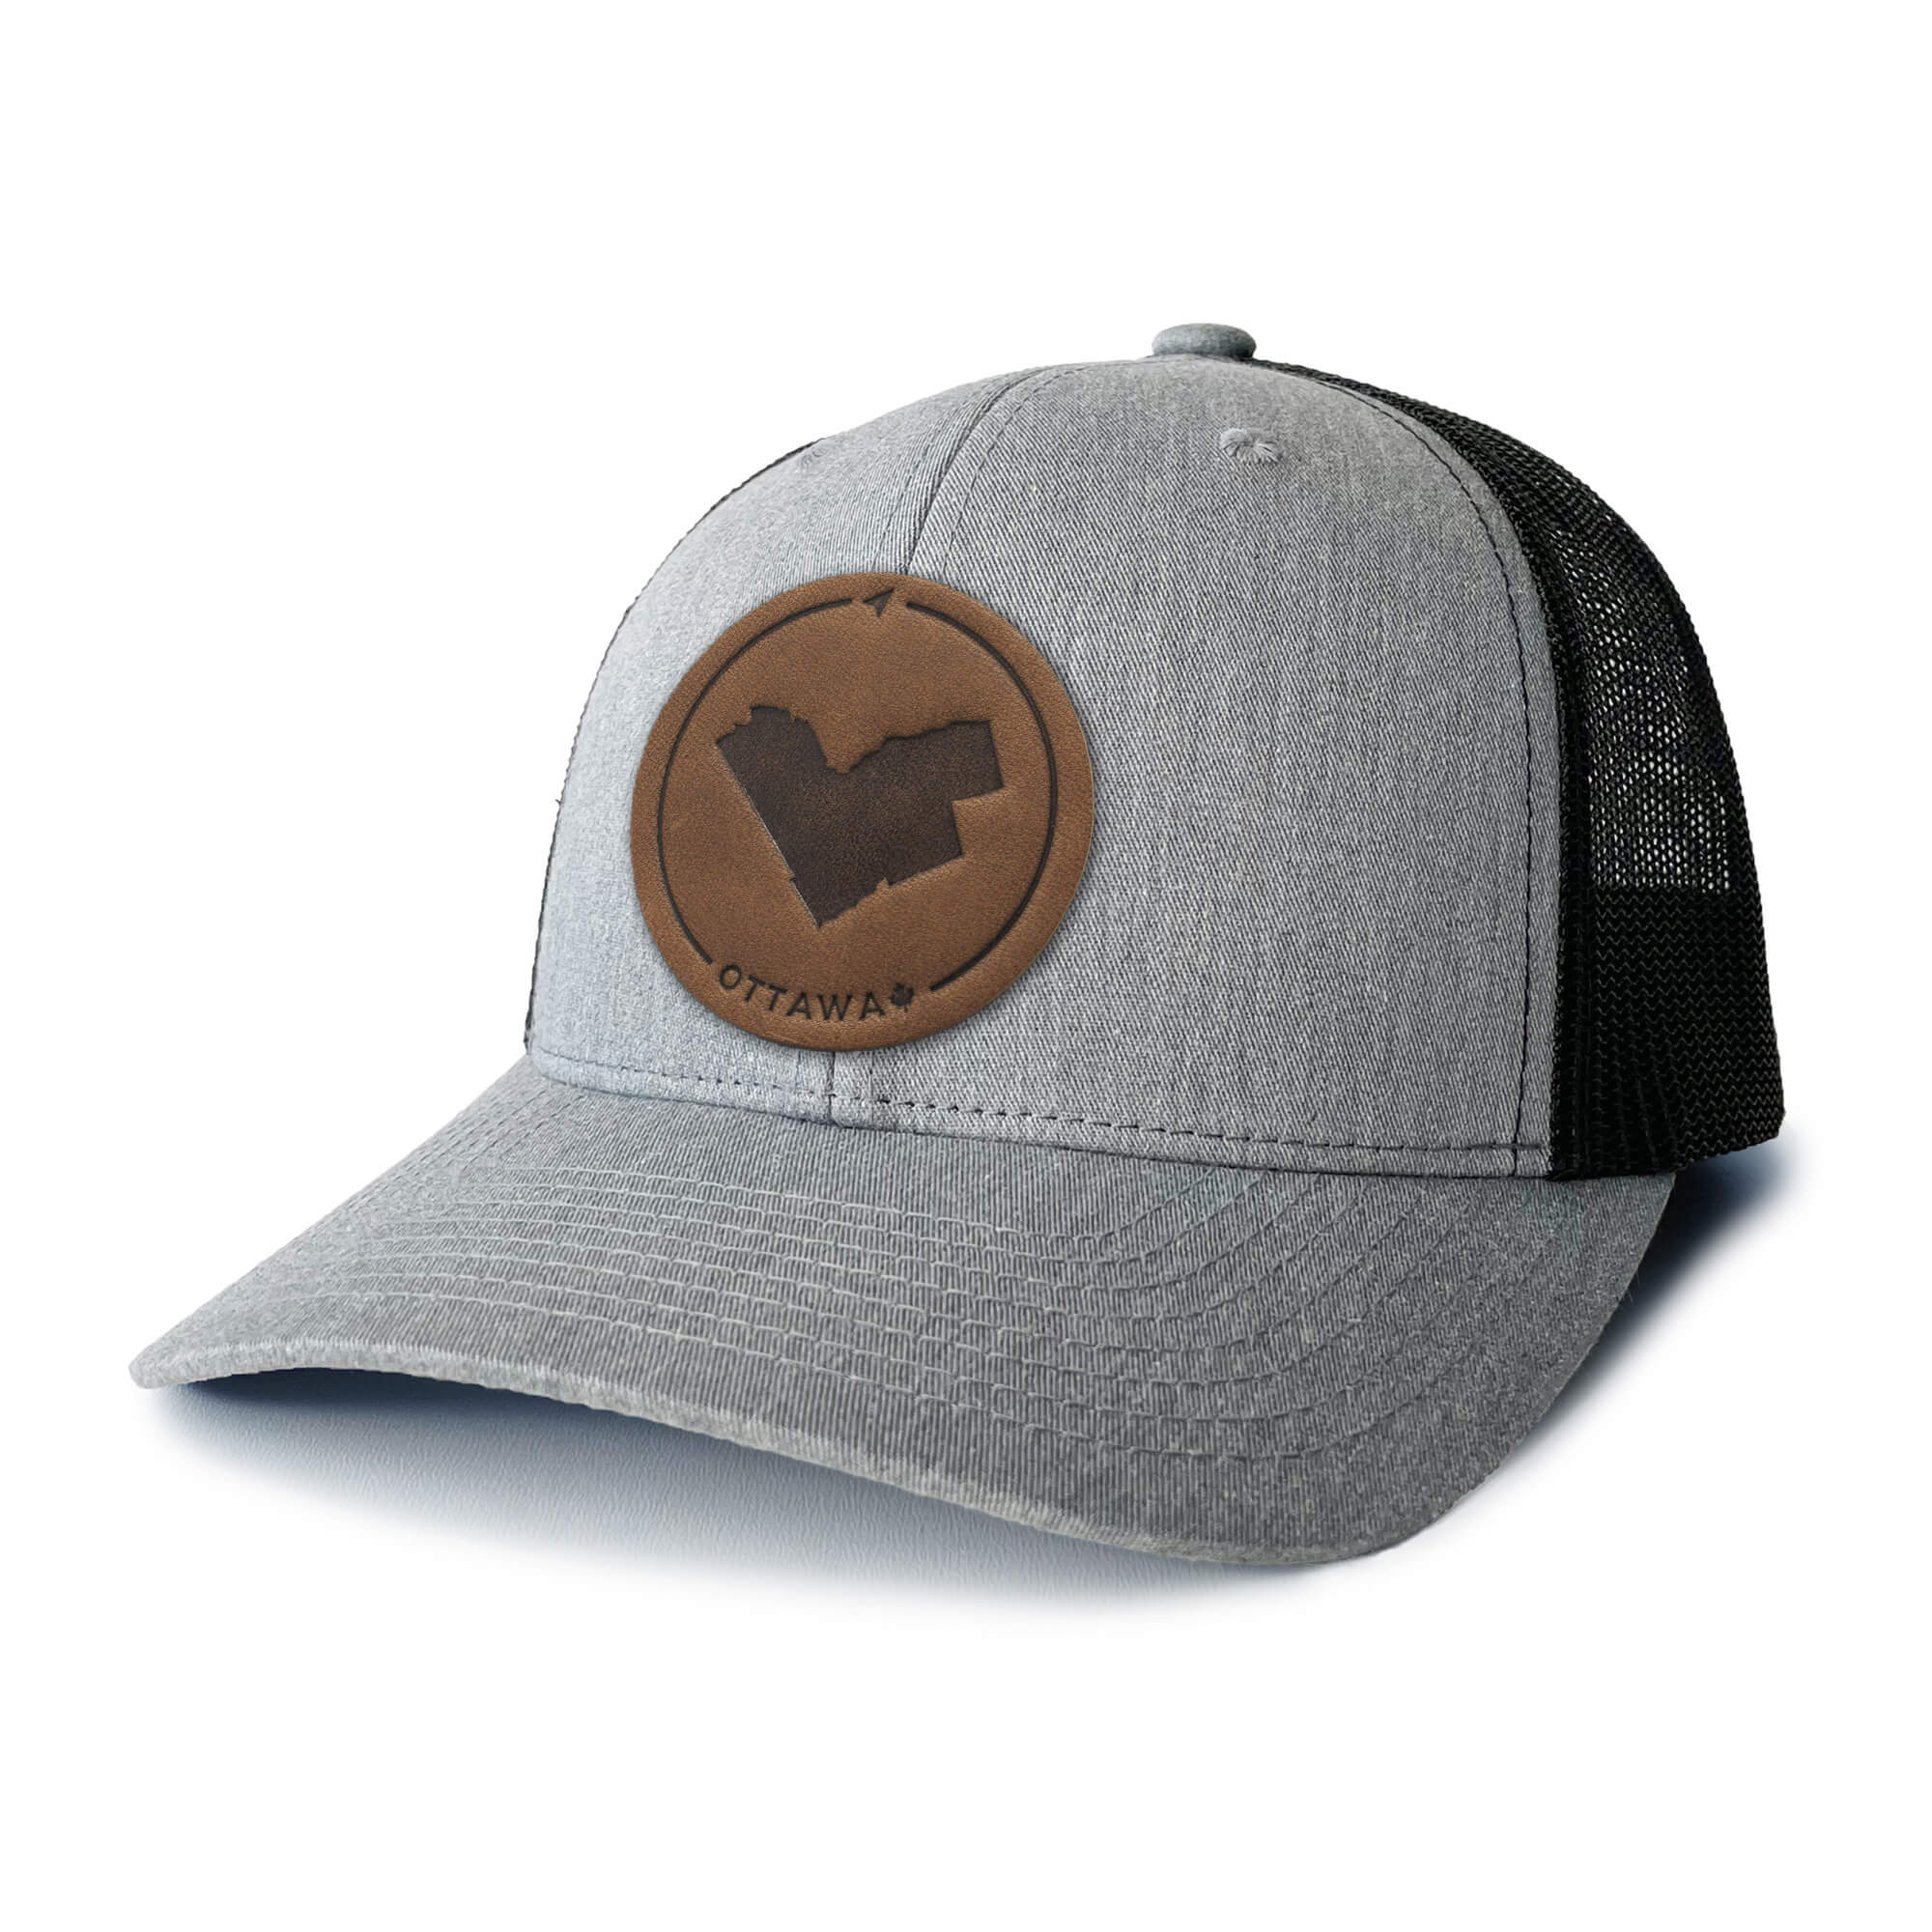 Heather Grey and white trucker hat with full-grain leather patch of Ottawa | BLACK-002-007, CHARC-002-007, NAVY-002-007, HGREY-002-007, MOSS-002-007, BROWN-002-007